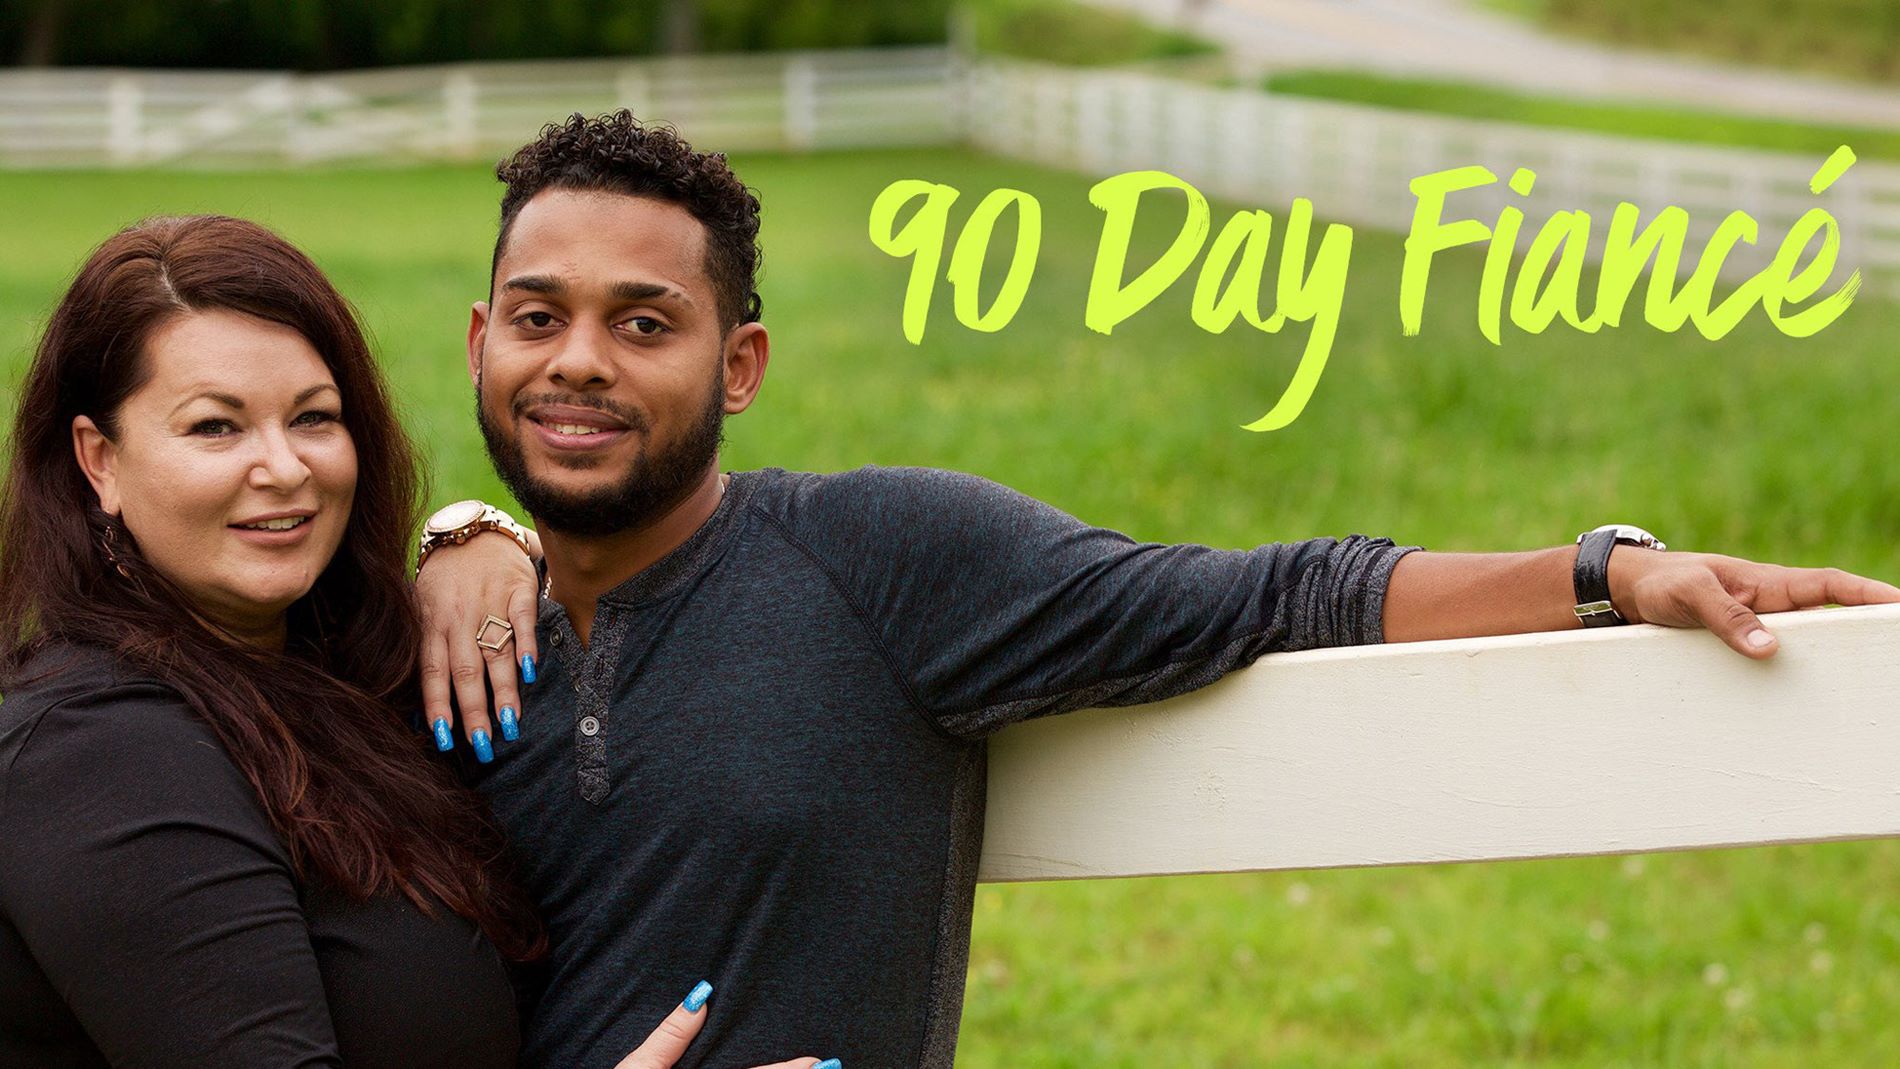 How To Watch 90 Day Fiance In Order